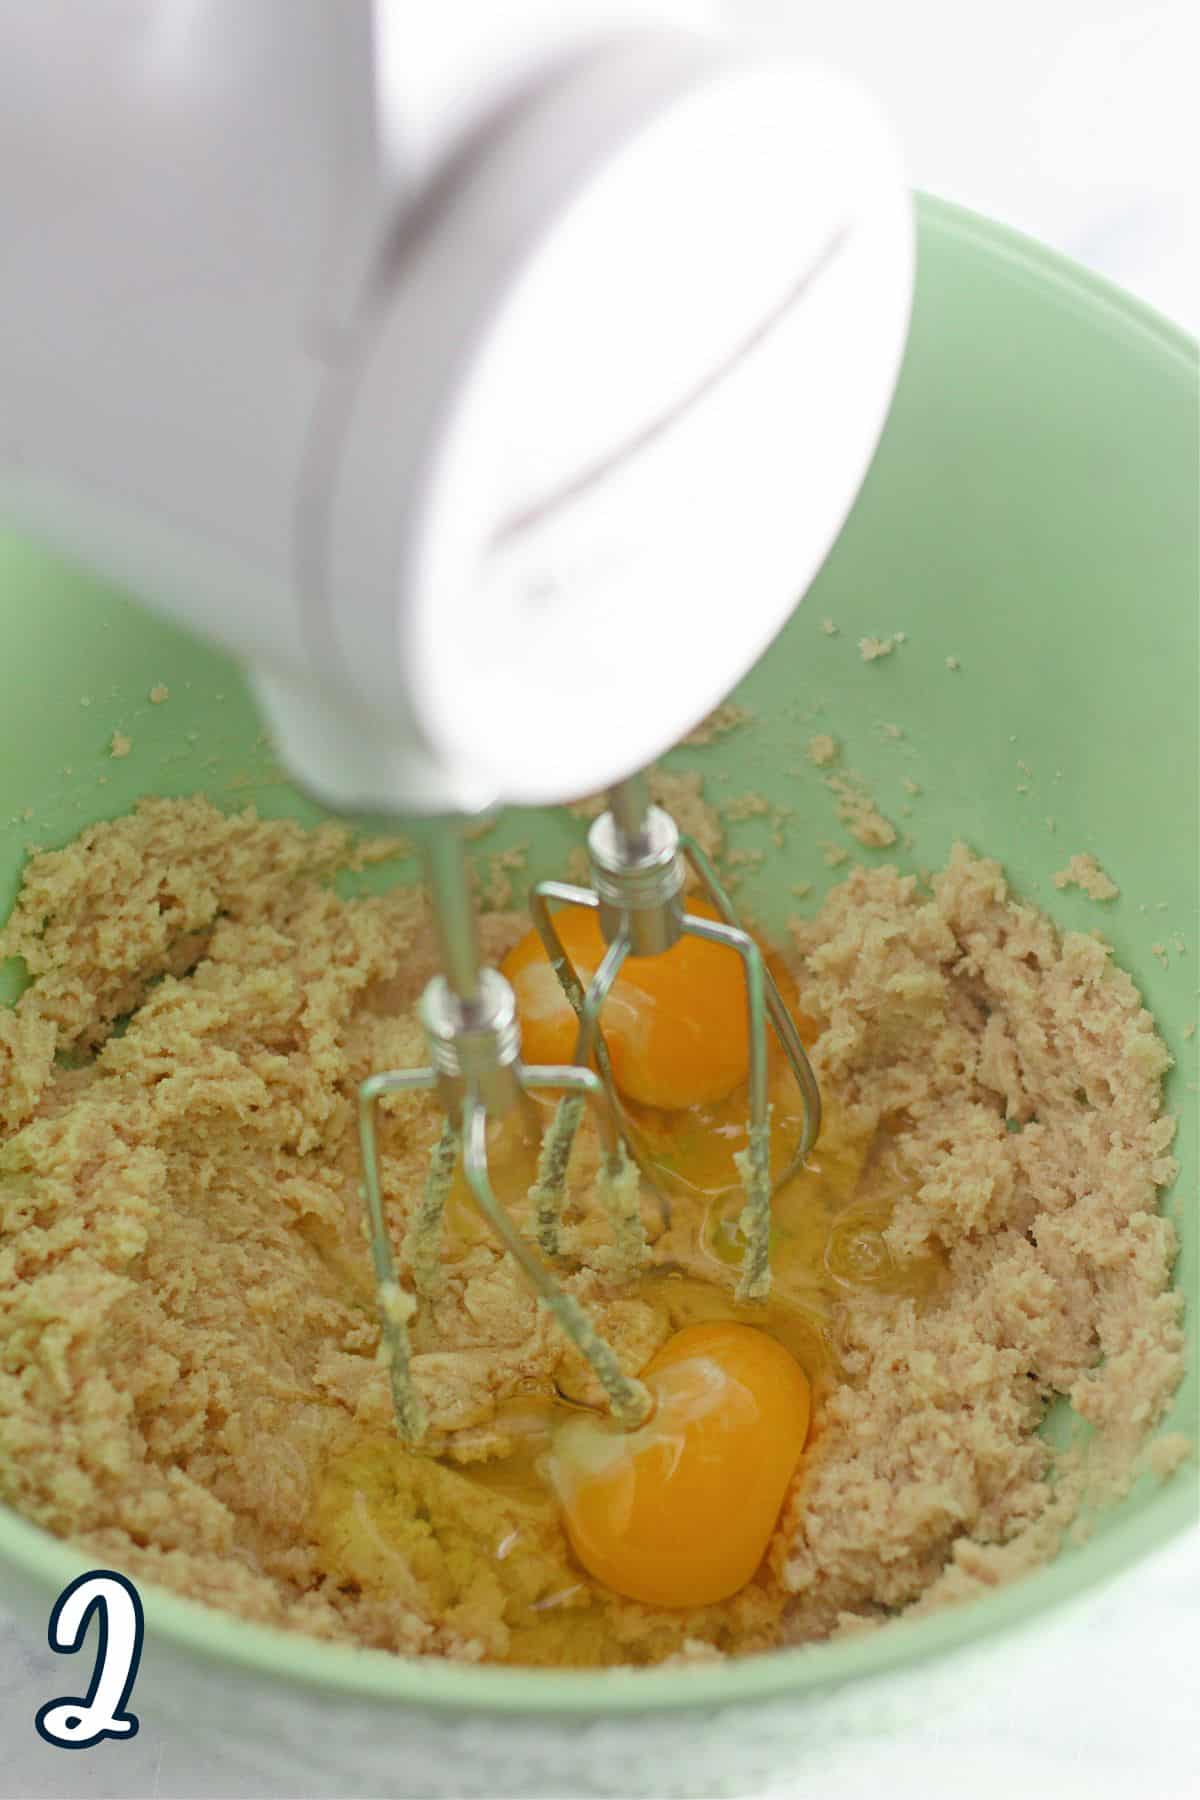 A green bowl with eggs, butter, sugar, and a hand mixer.